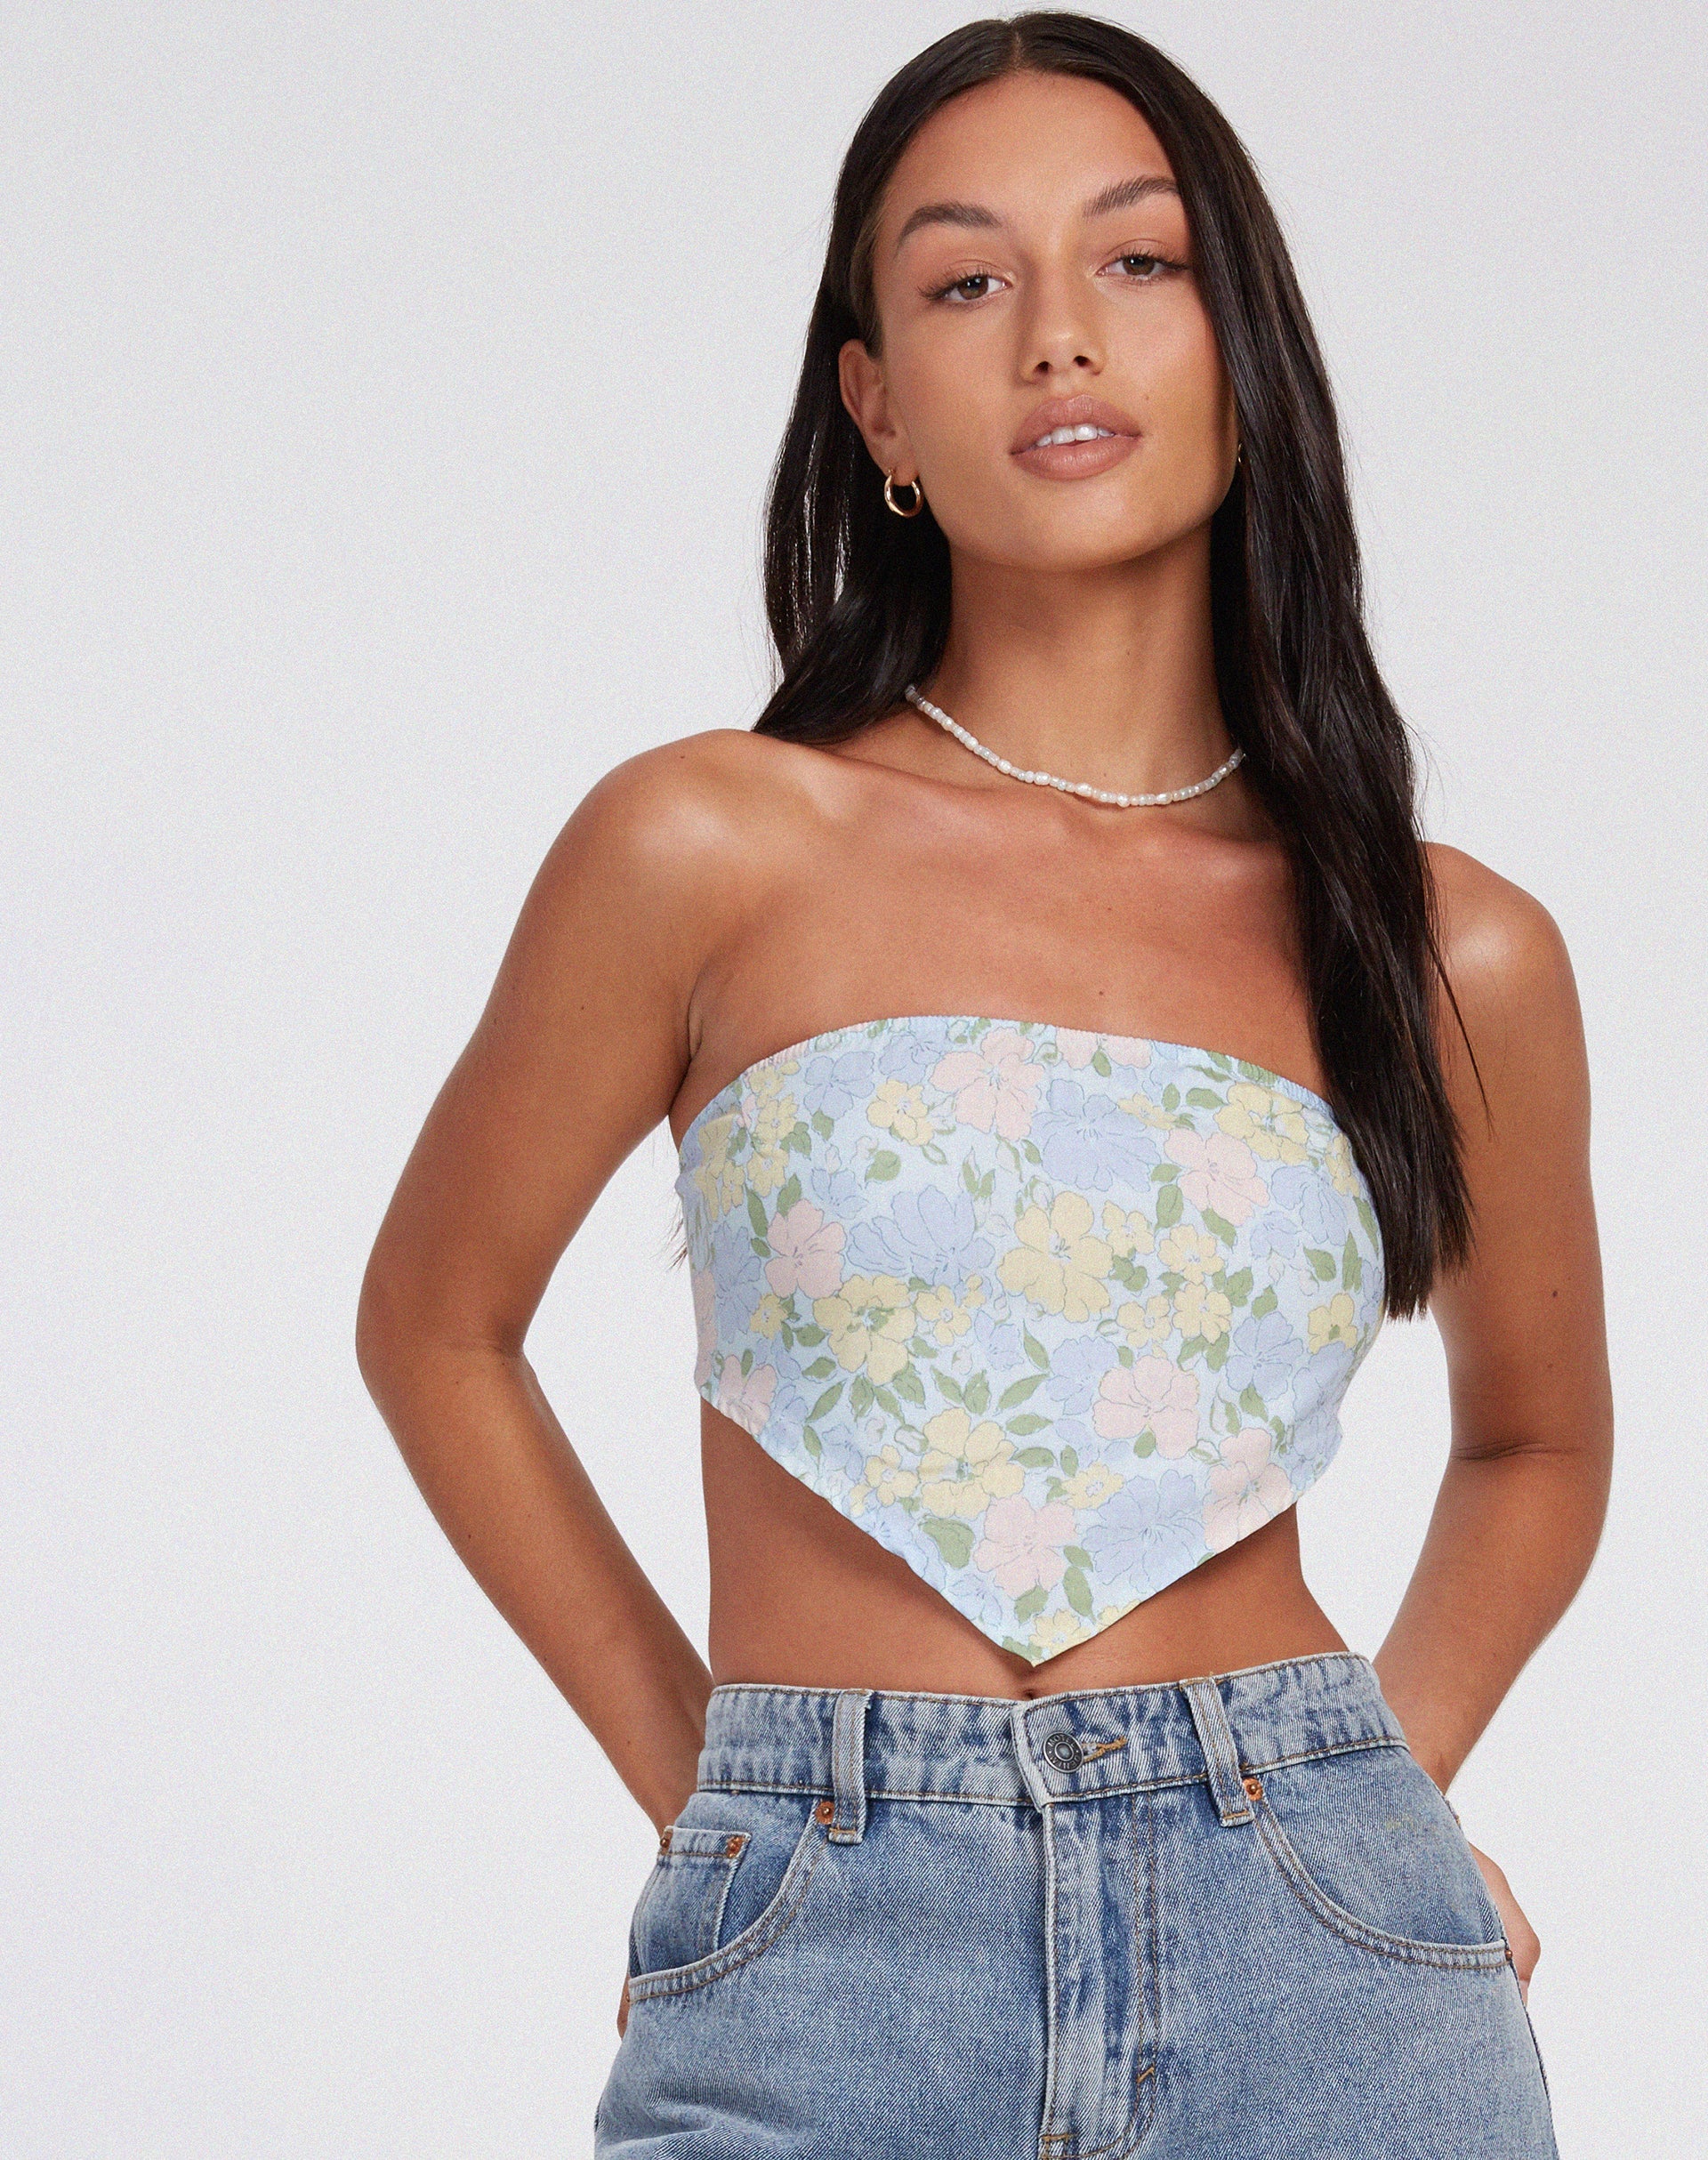 image of Nolda Crop Top in Washed Out Pastel Floral